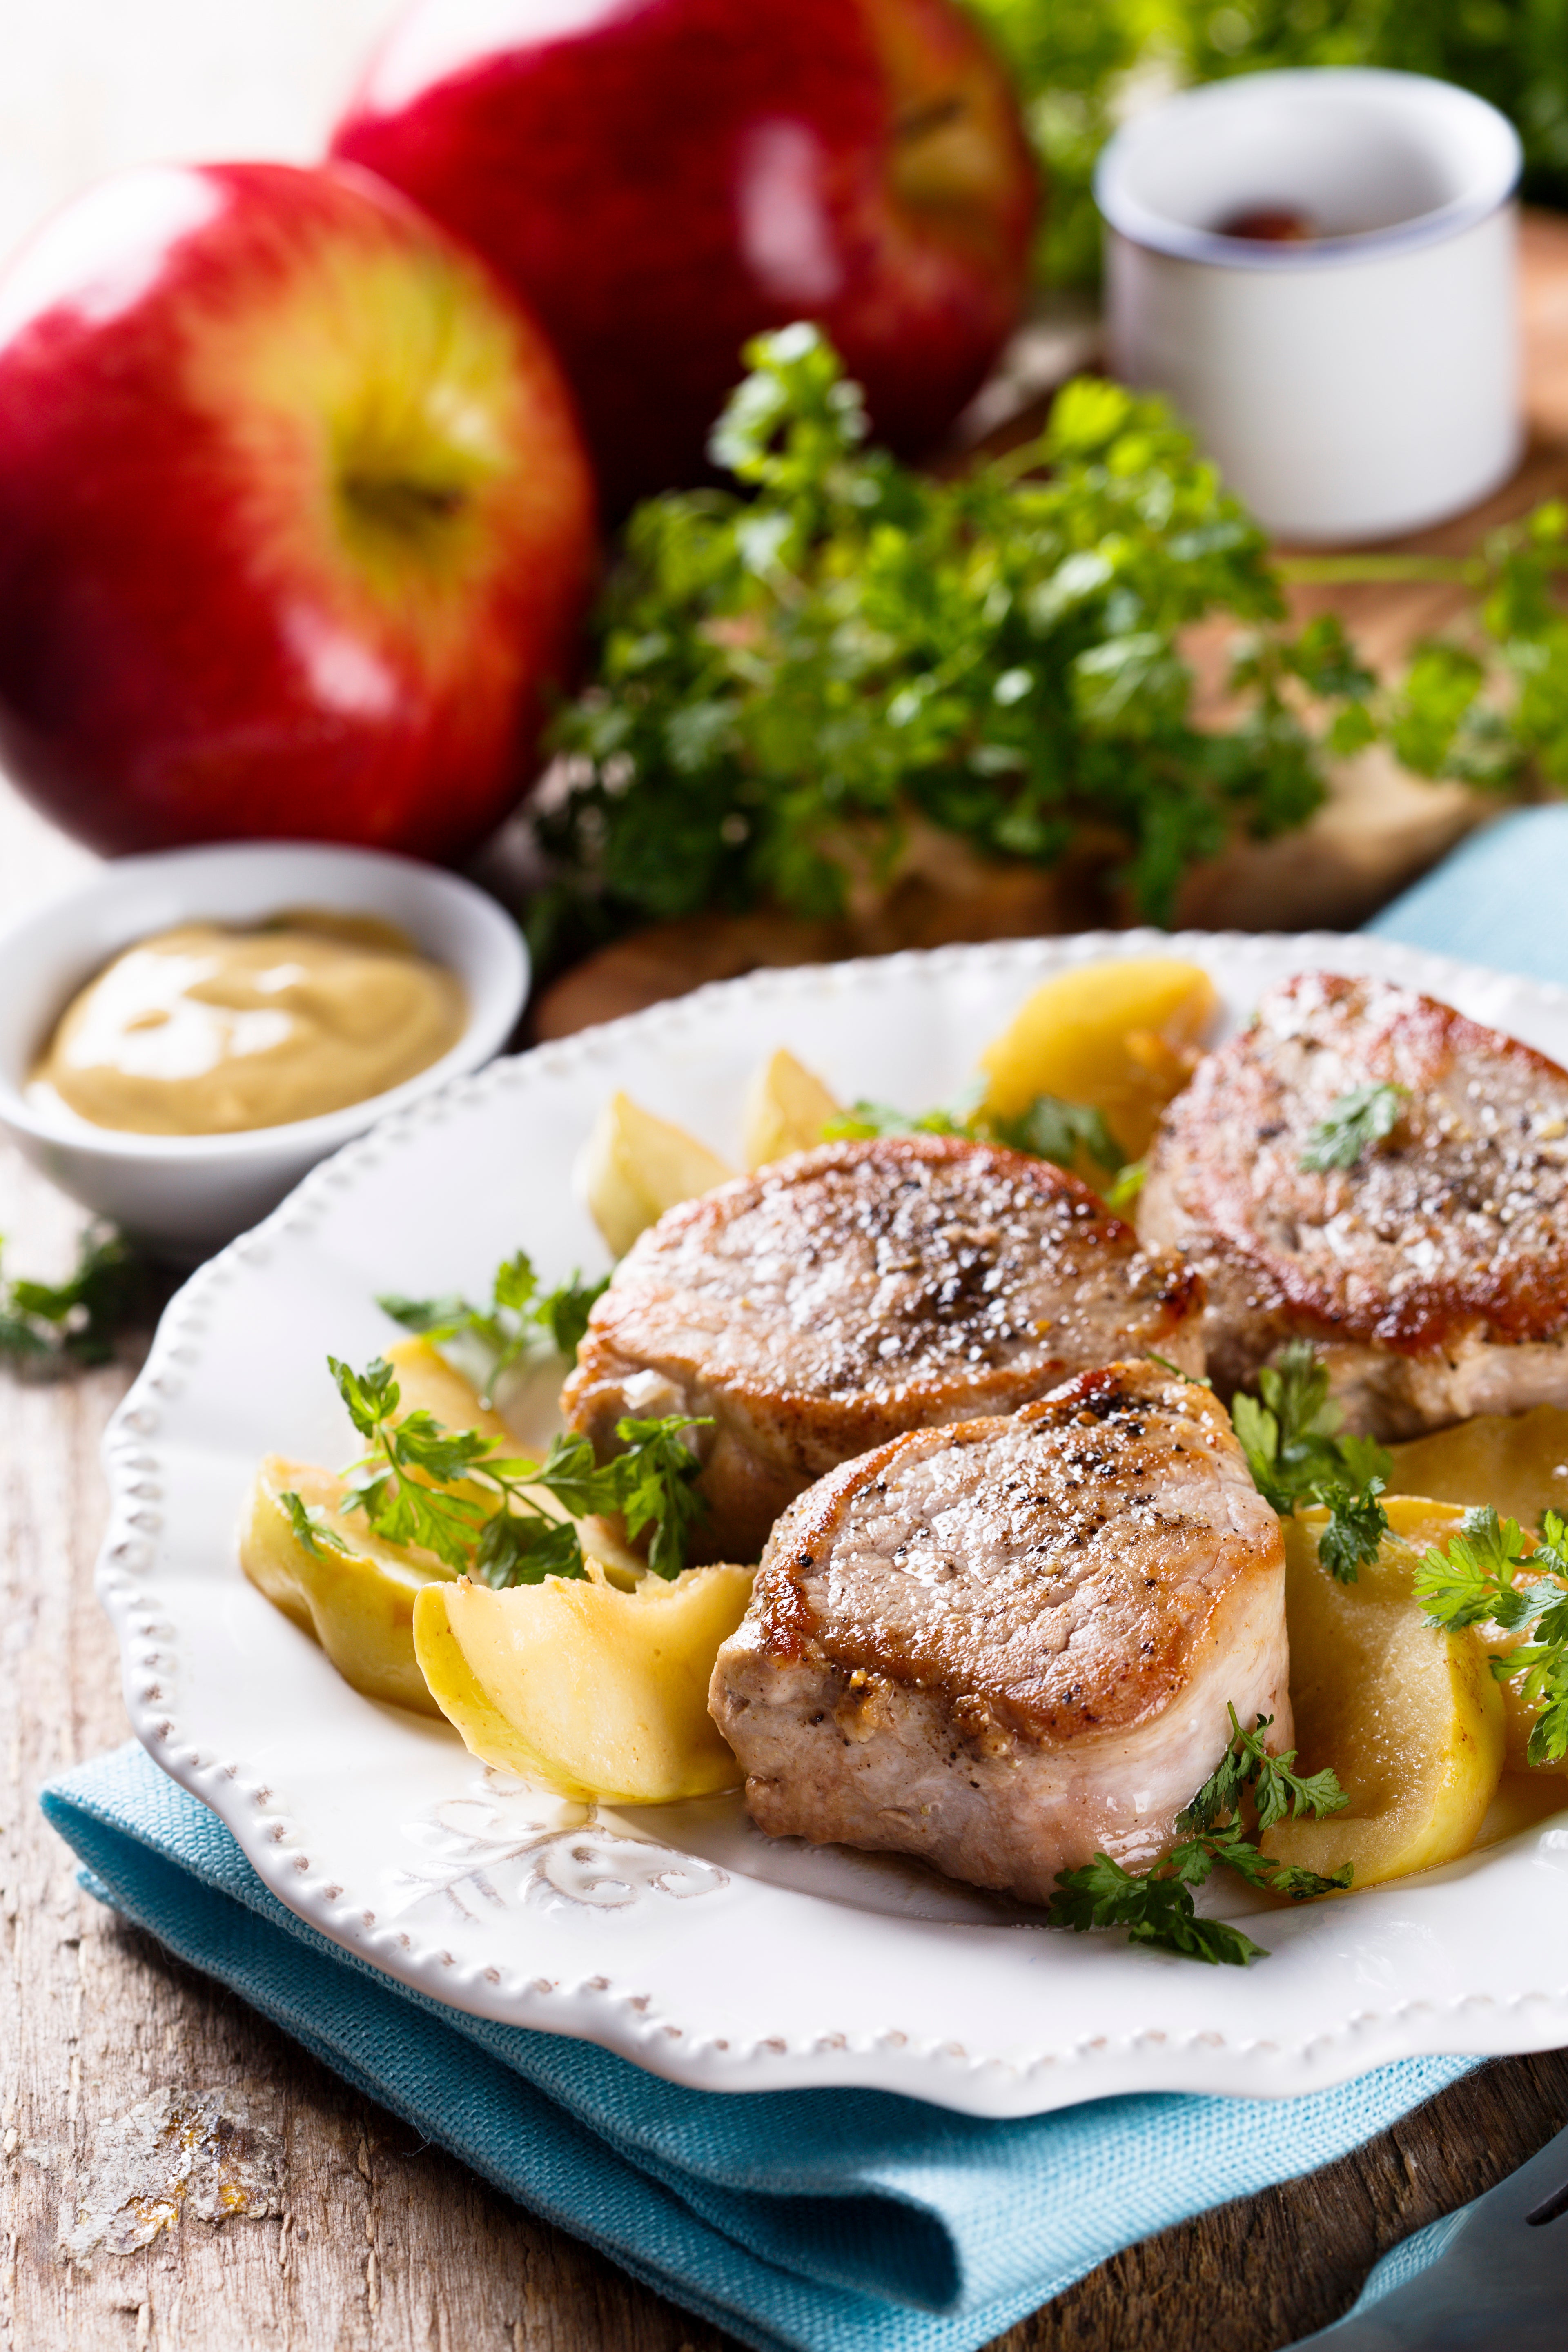 Apples and pork is a culinary combination that cannot be improved upon